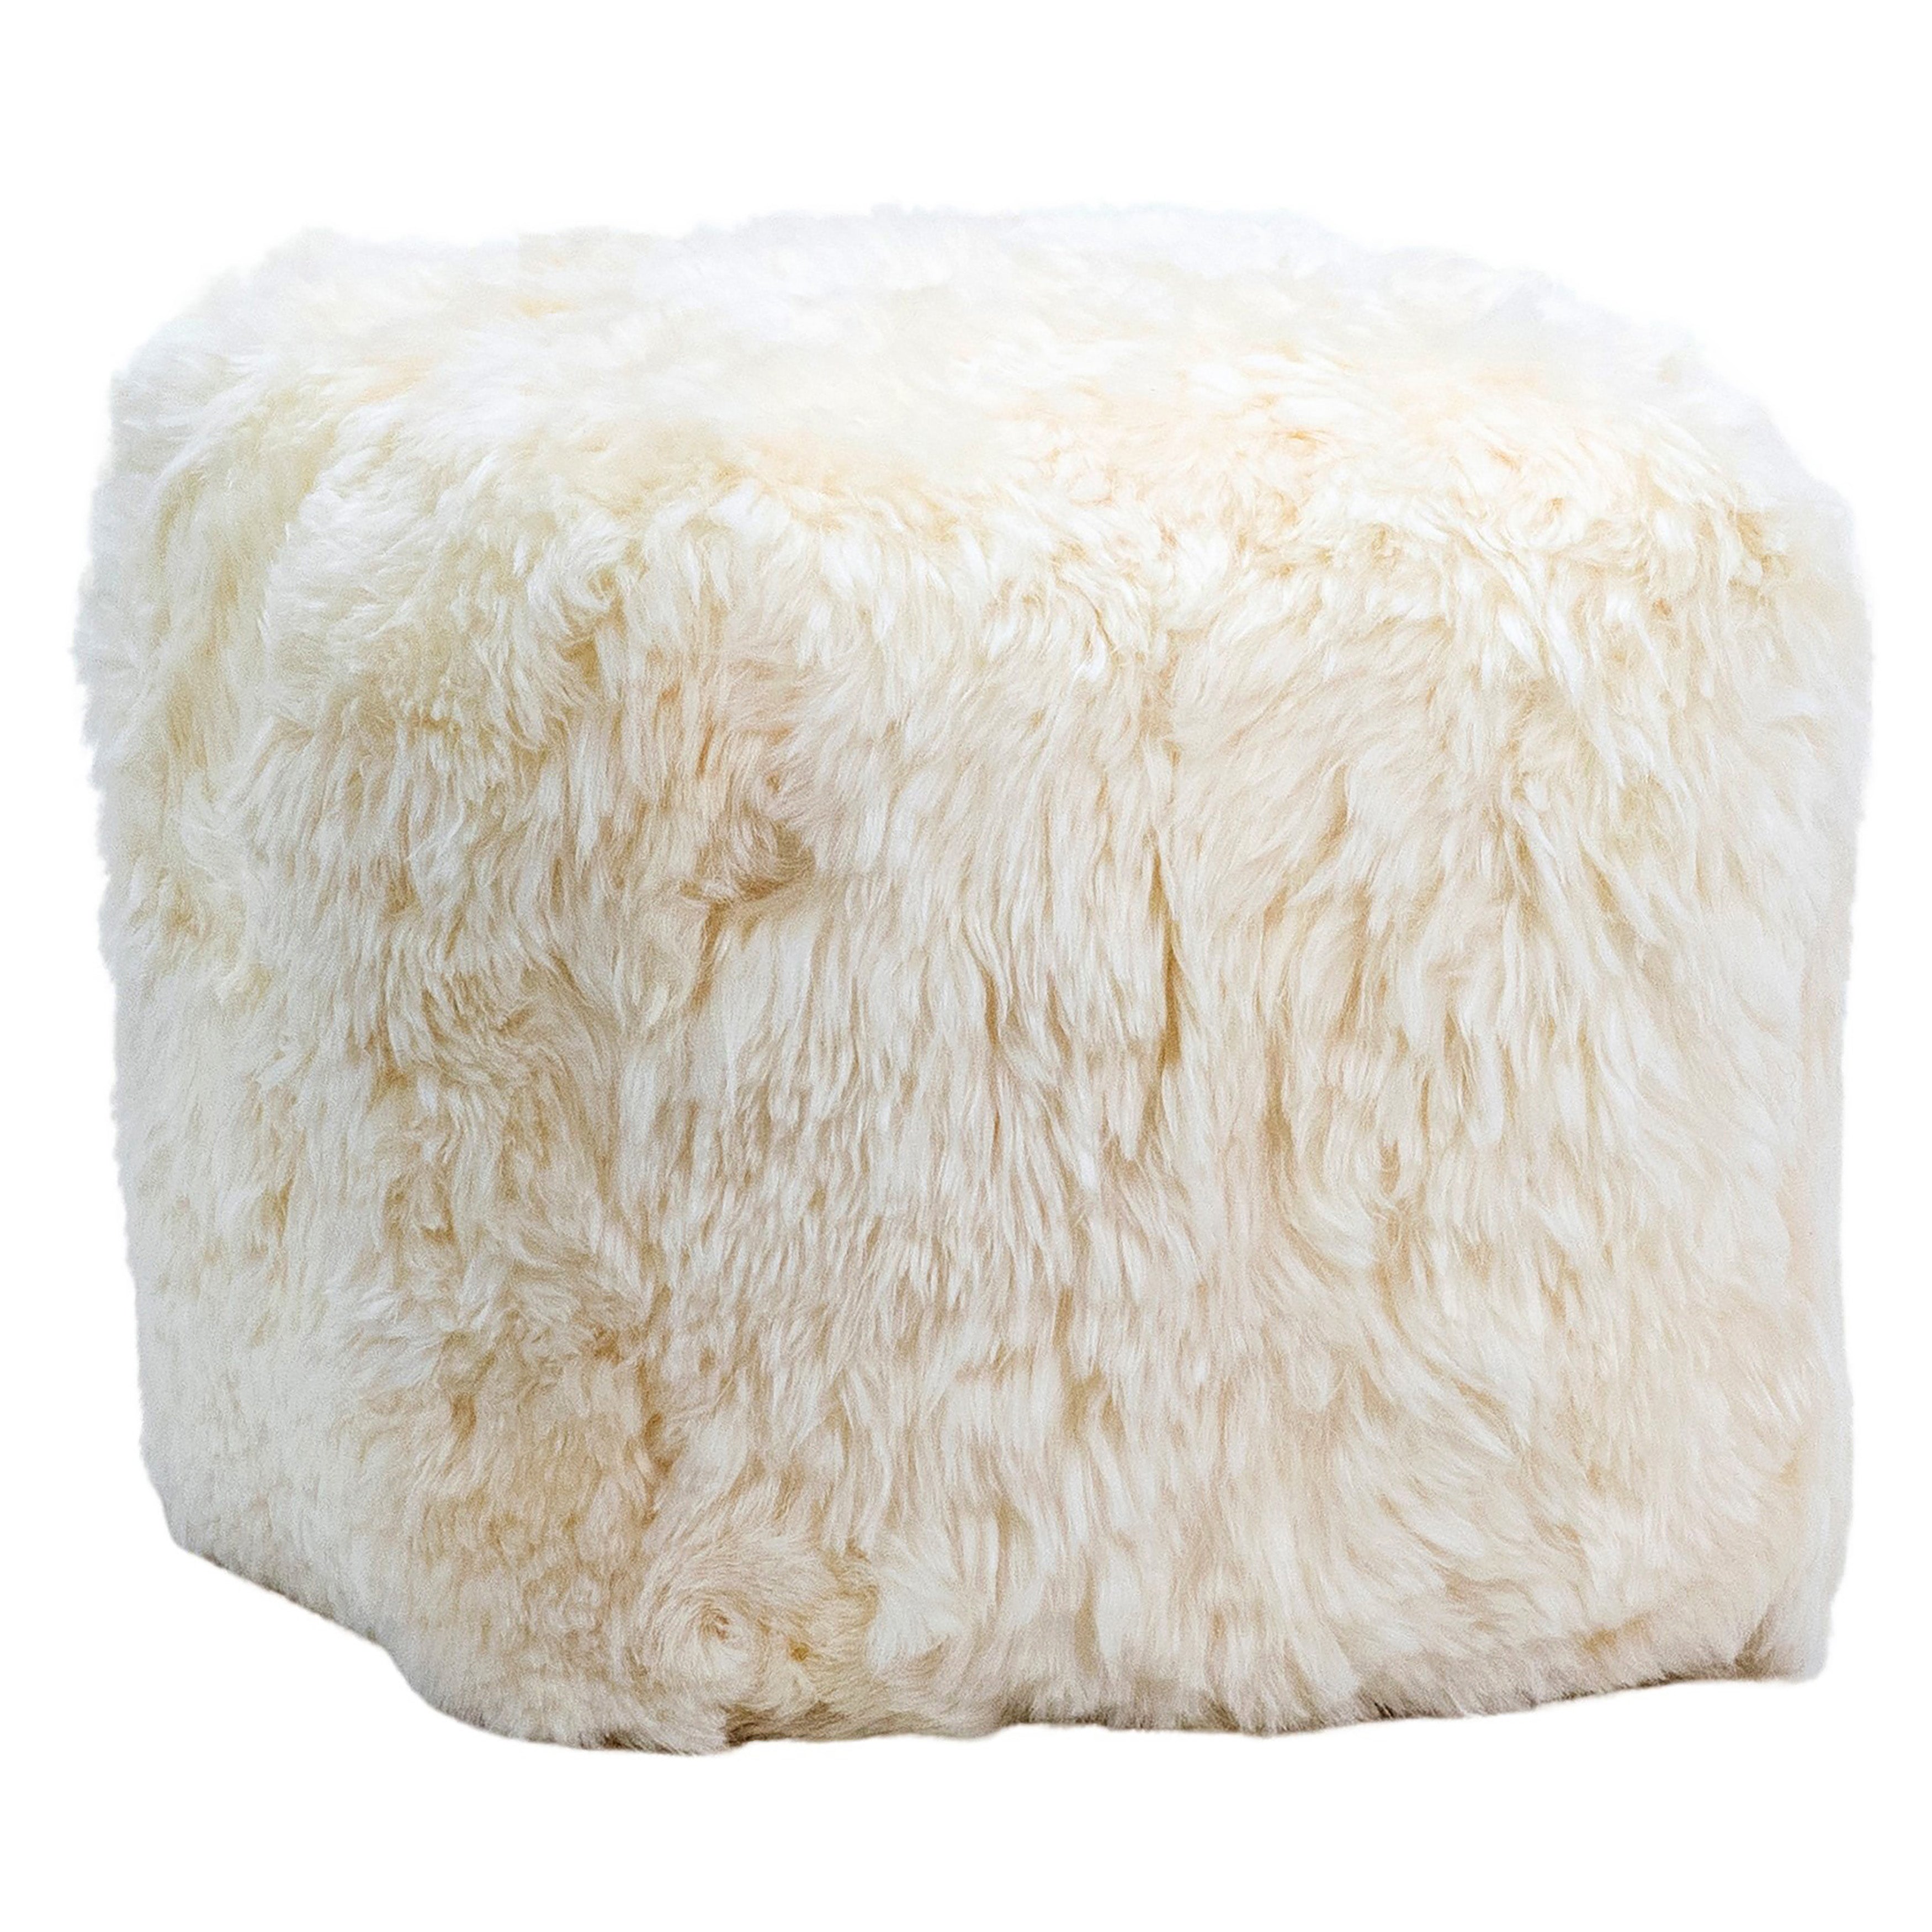 A classic accent piece designed with style and function in mind. This 16x16” Pouf can be used as an extra seat or ottoman to rest up your feet. Crafted from genuine sheep fur for an over-the-top luxurious touch. Featuring a natural white color that blends well with a variety of decor schemes in your home.Depth : 16 in Amethyst Home provides interior design, new home construction design consulting, vintage area rugs, and lighting in the Newport Beach metro area.